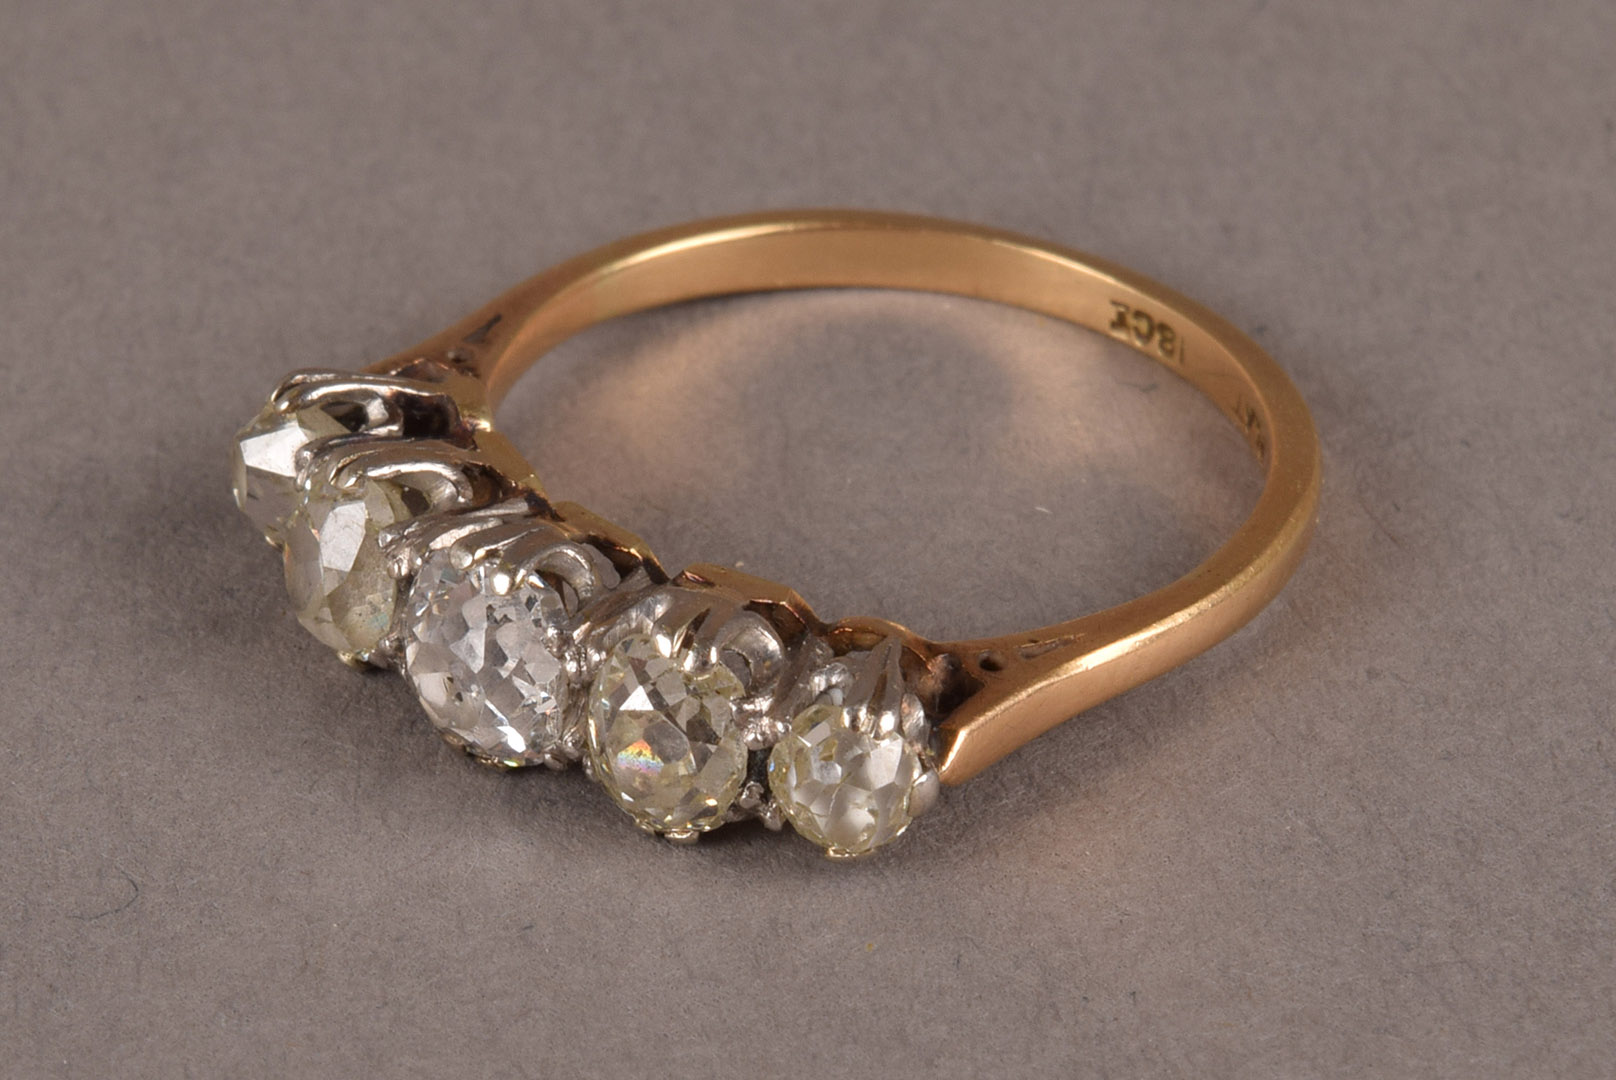 A late Victorian or Edwardian period five stone diamond engagement ring, having graduating old